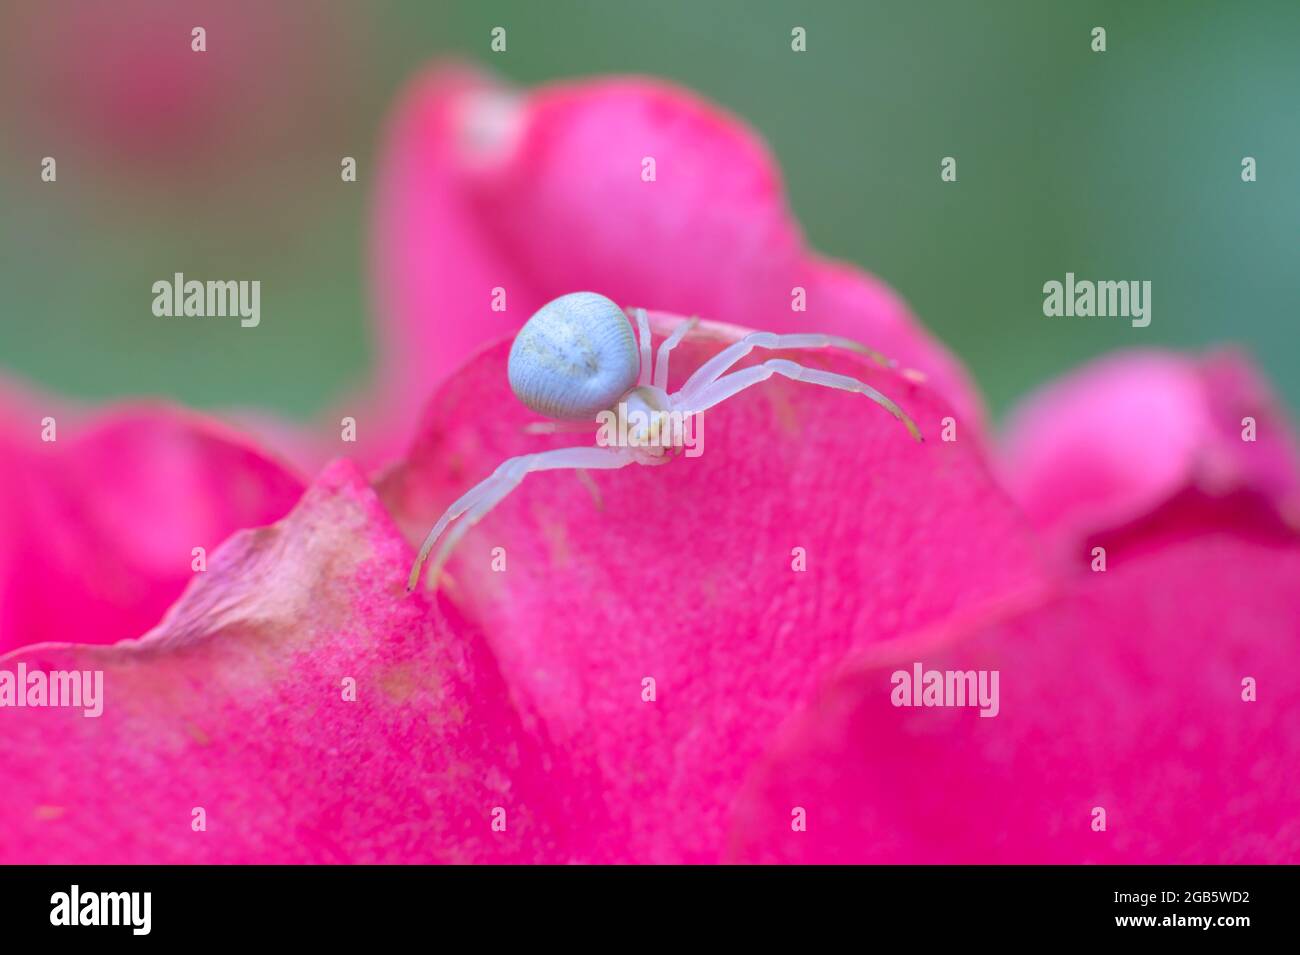 Closeup shot of small white spider sitting on the purple rose petals. Stock Photo